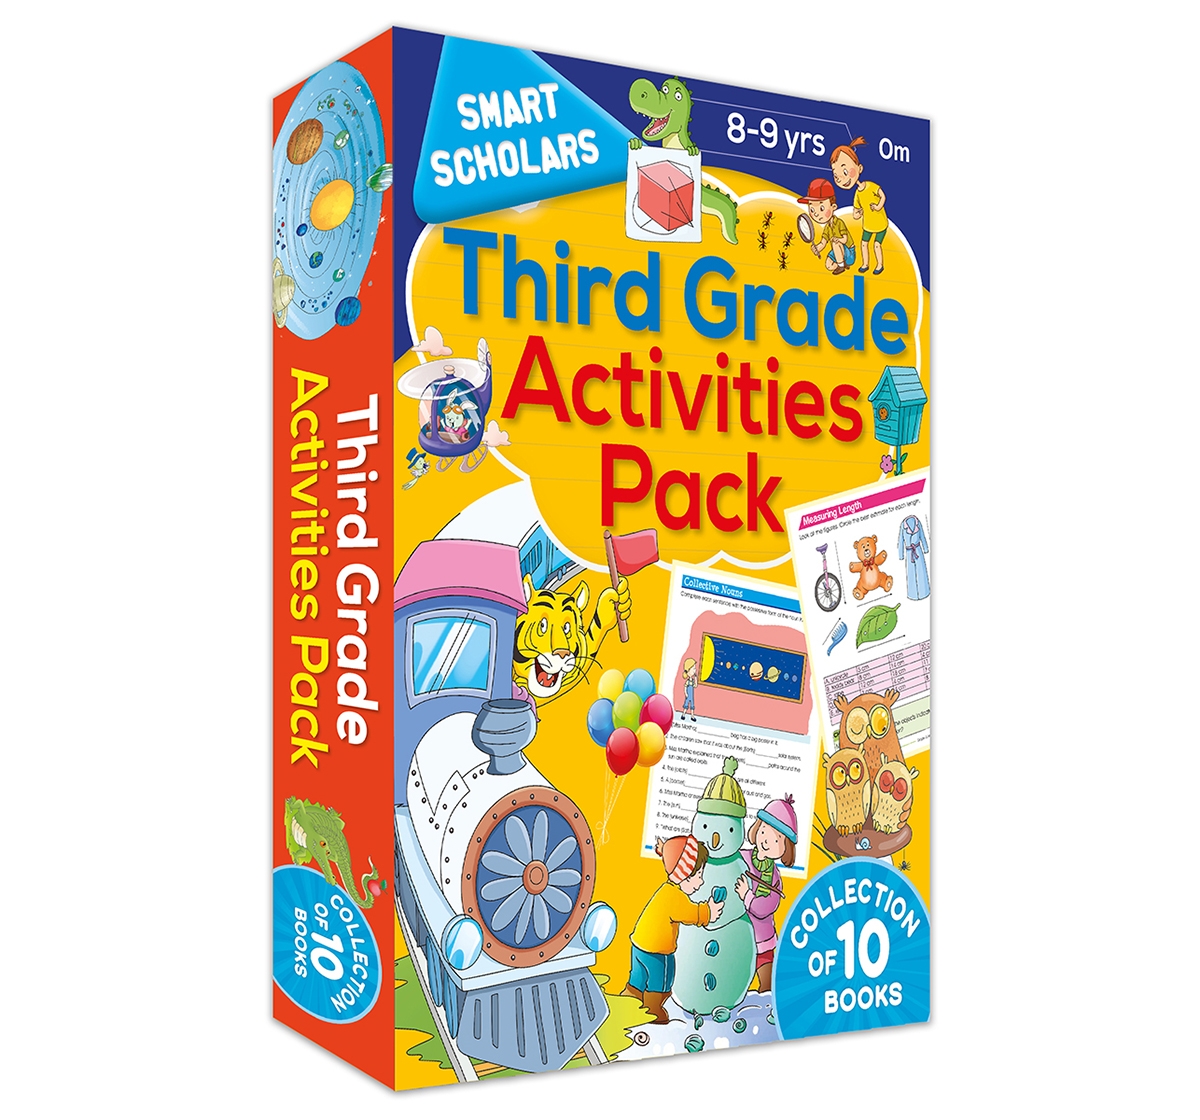 Om Kidz | Third Grade Activities Pack Smart Scholars, 320 Pages Book By Om Books Editorial Team, Paperback(Collection Of 10 Books)